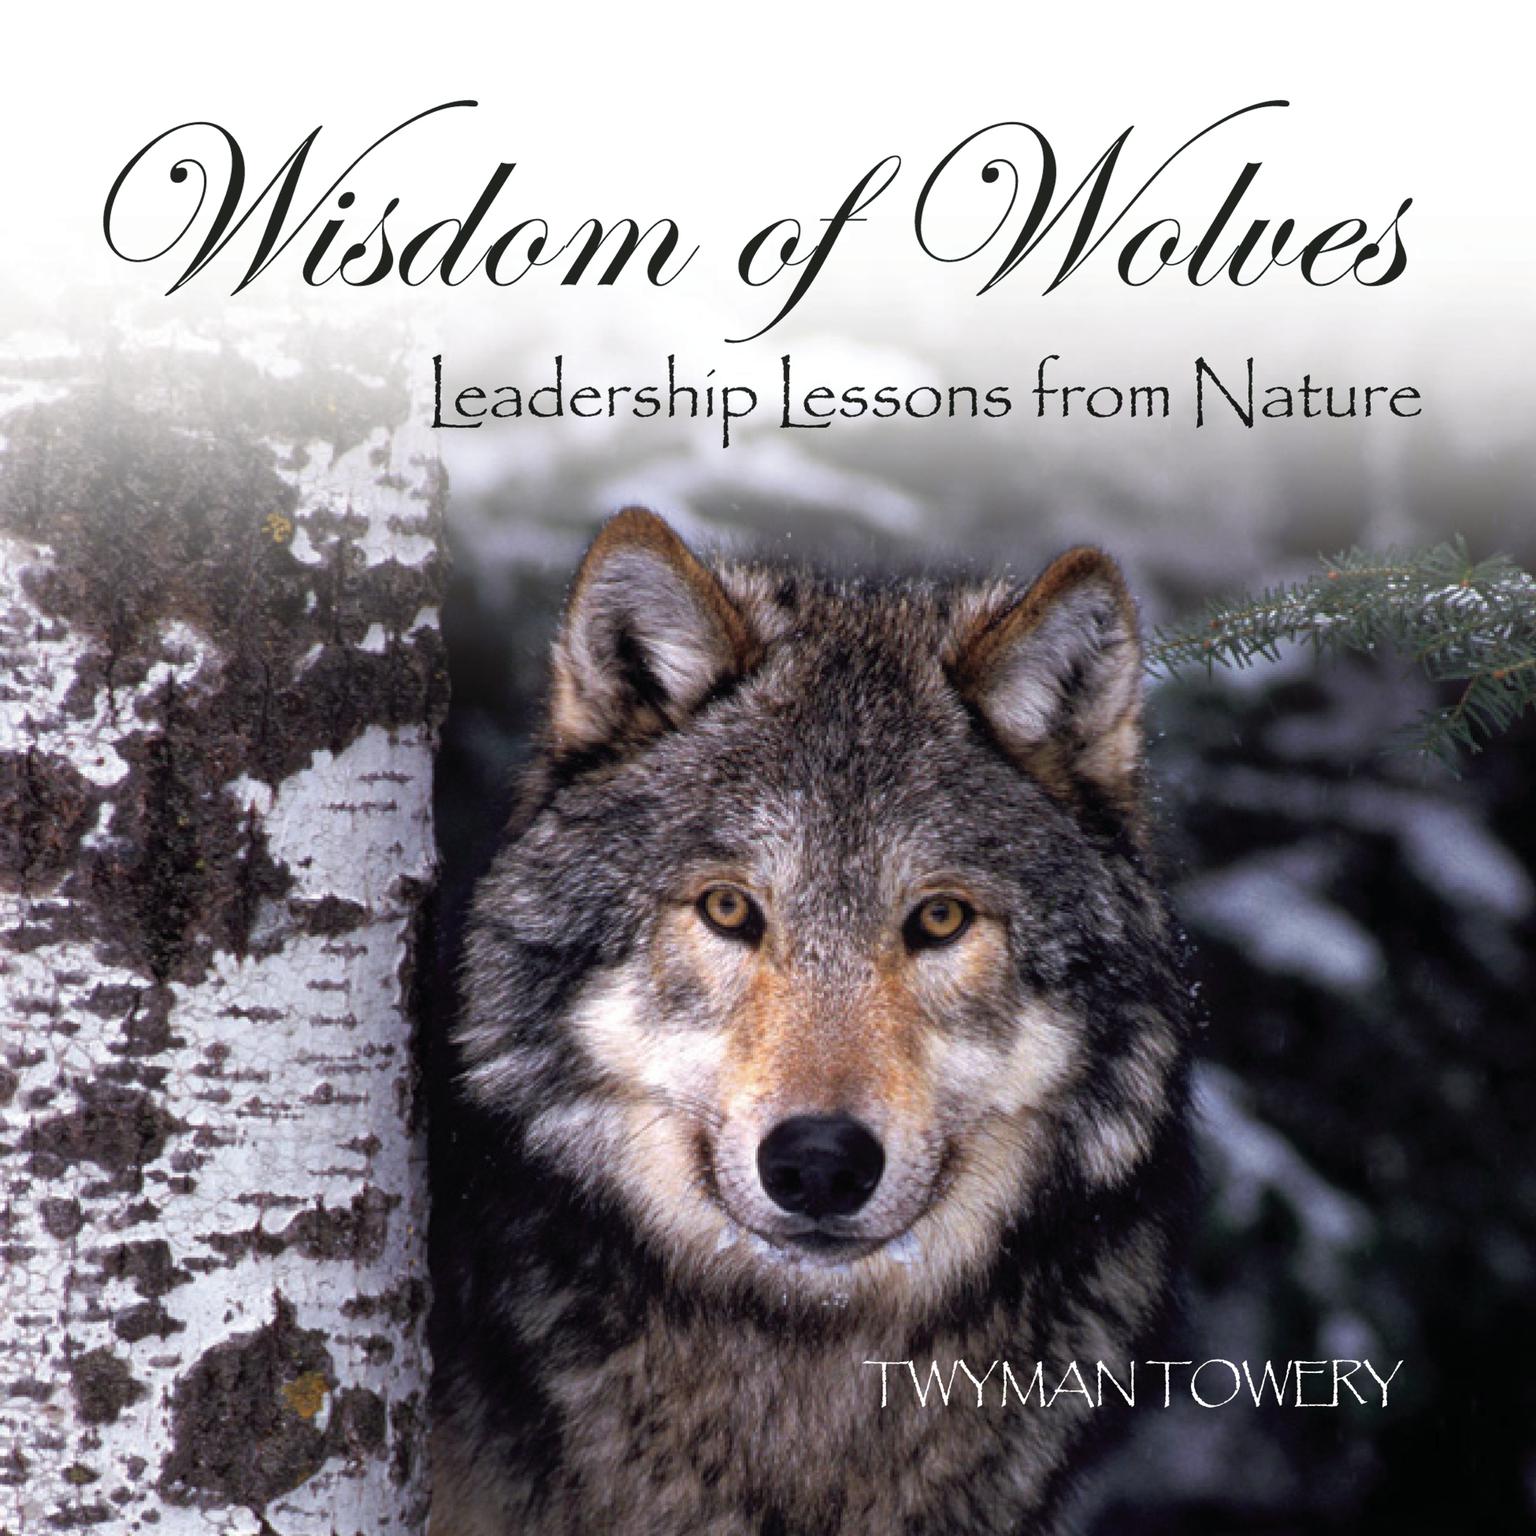 Wisdom of Wolves: Leadership Lessons from Nature Audiobook, by Twyman Towery